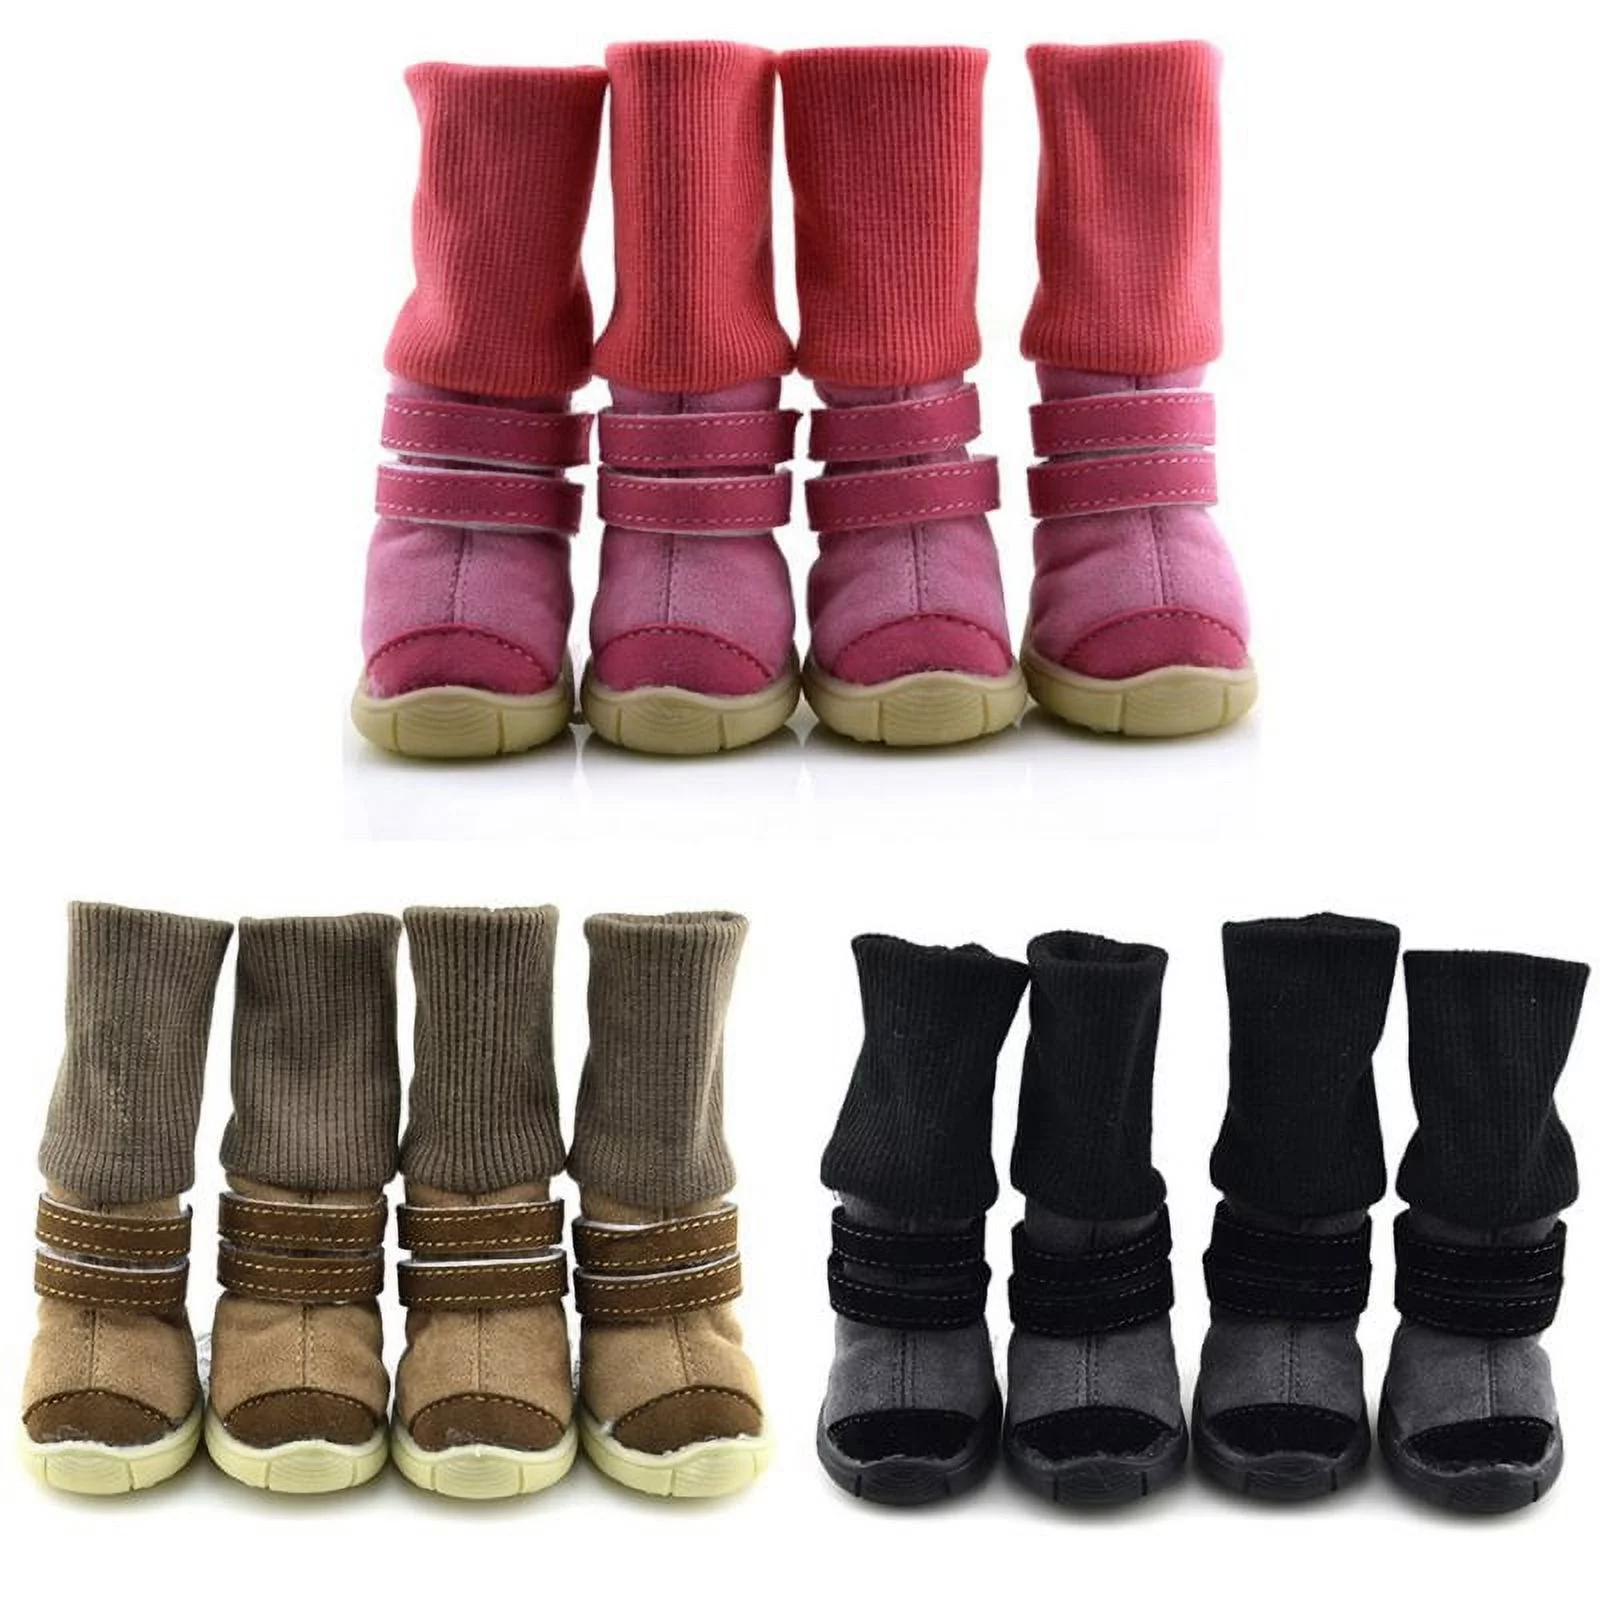 Waterproof Pet Dog Boots, Anti-Slip Waterproof Winter Warm PU Dog Shoes, Suitable for Small Medium Large Dog